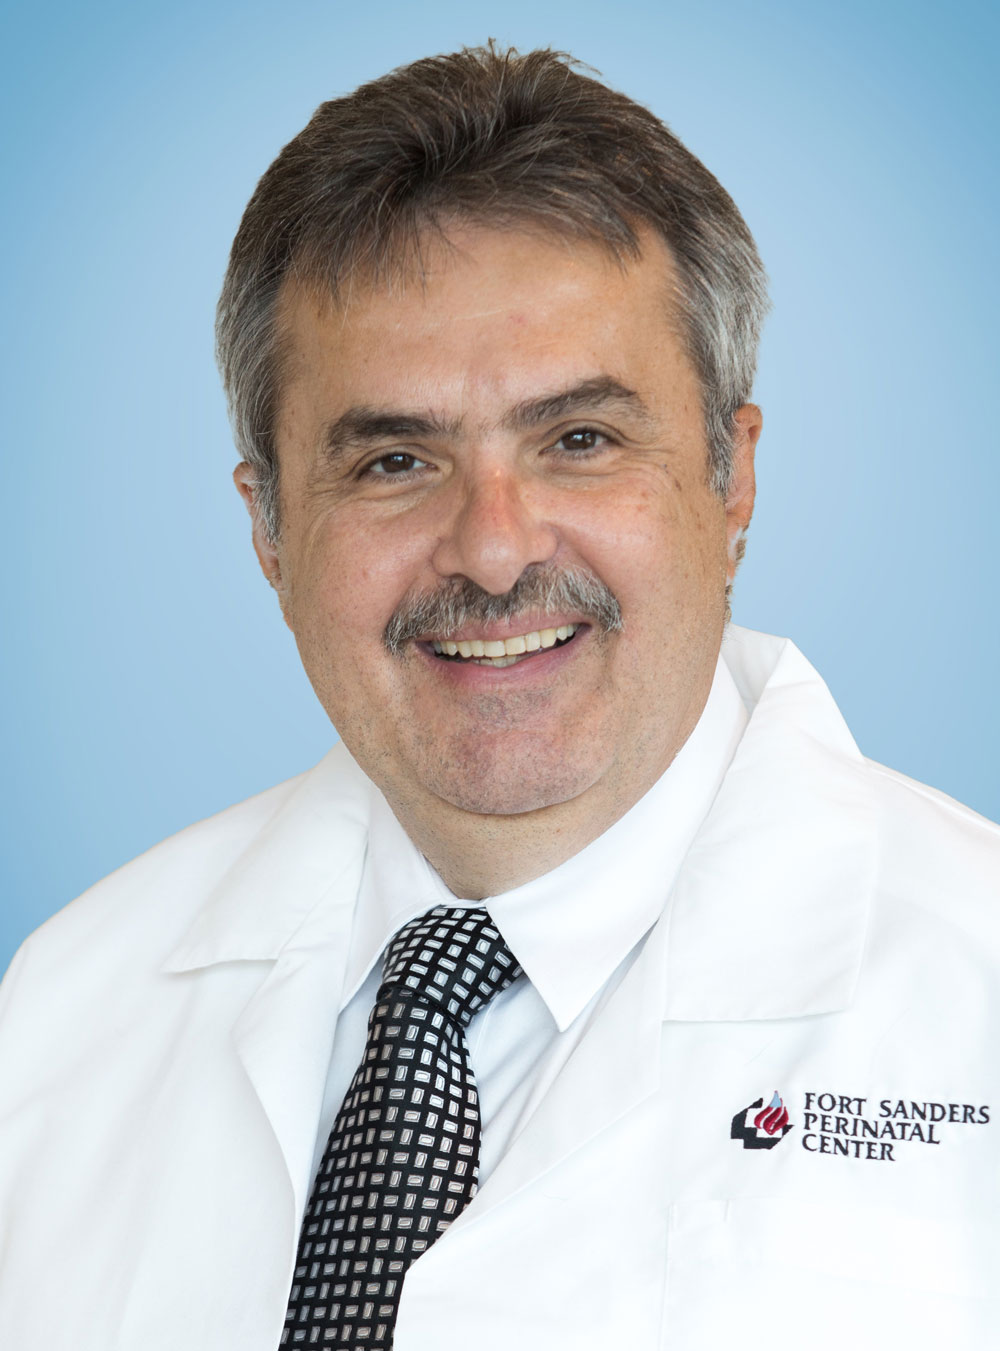 Perry Roussis, MD, FACOG